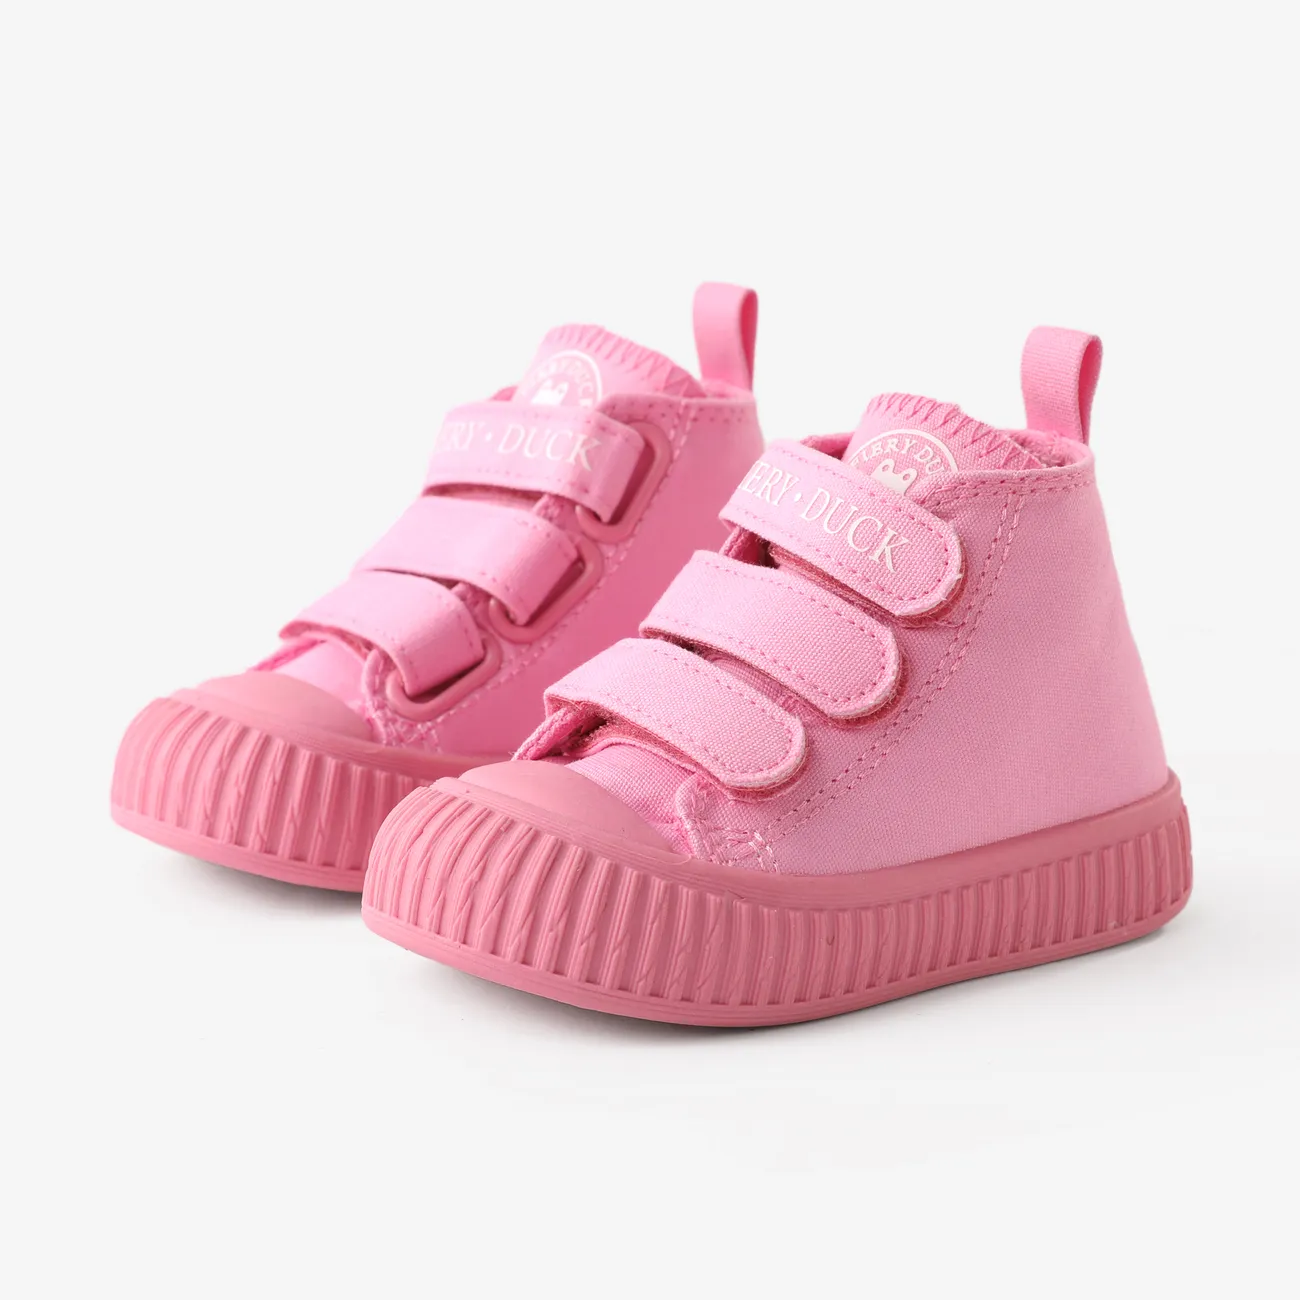 Day Toddler & Kids Velcro Design Casual Shoes Pink big image 1